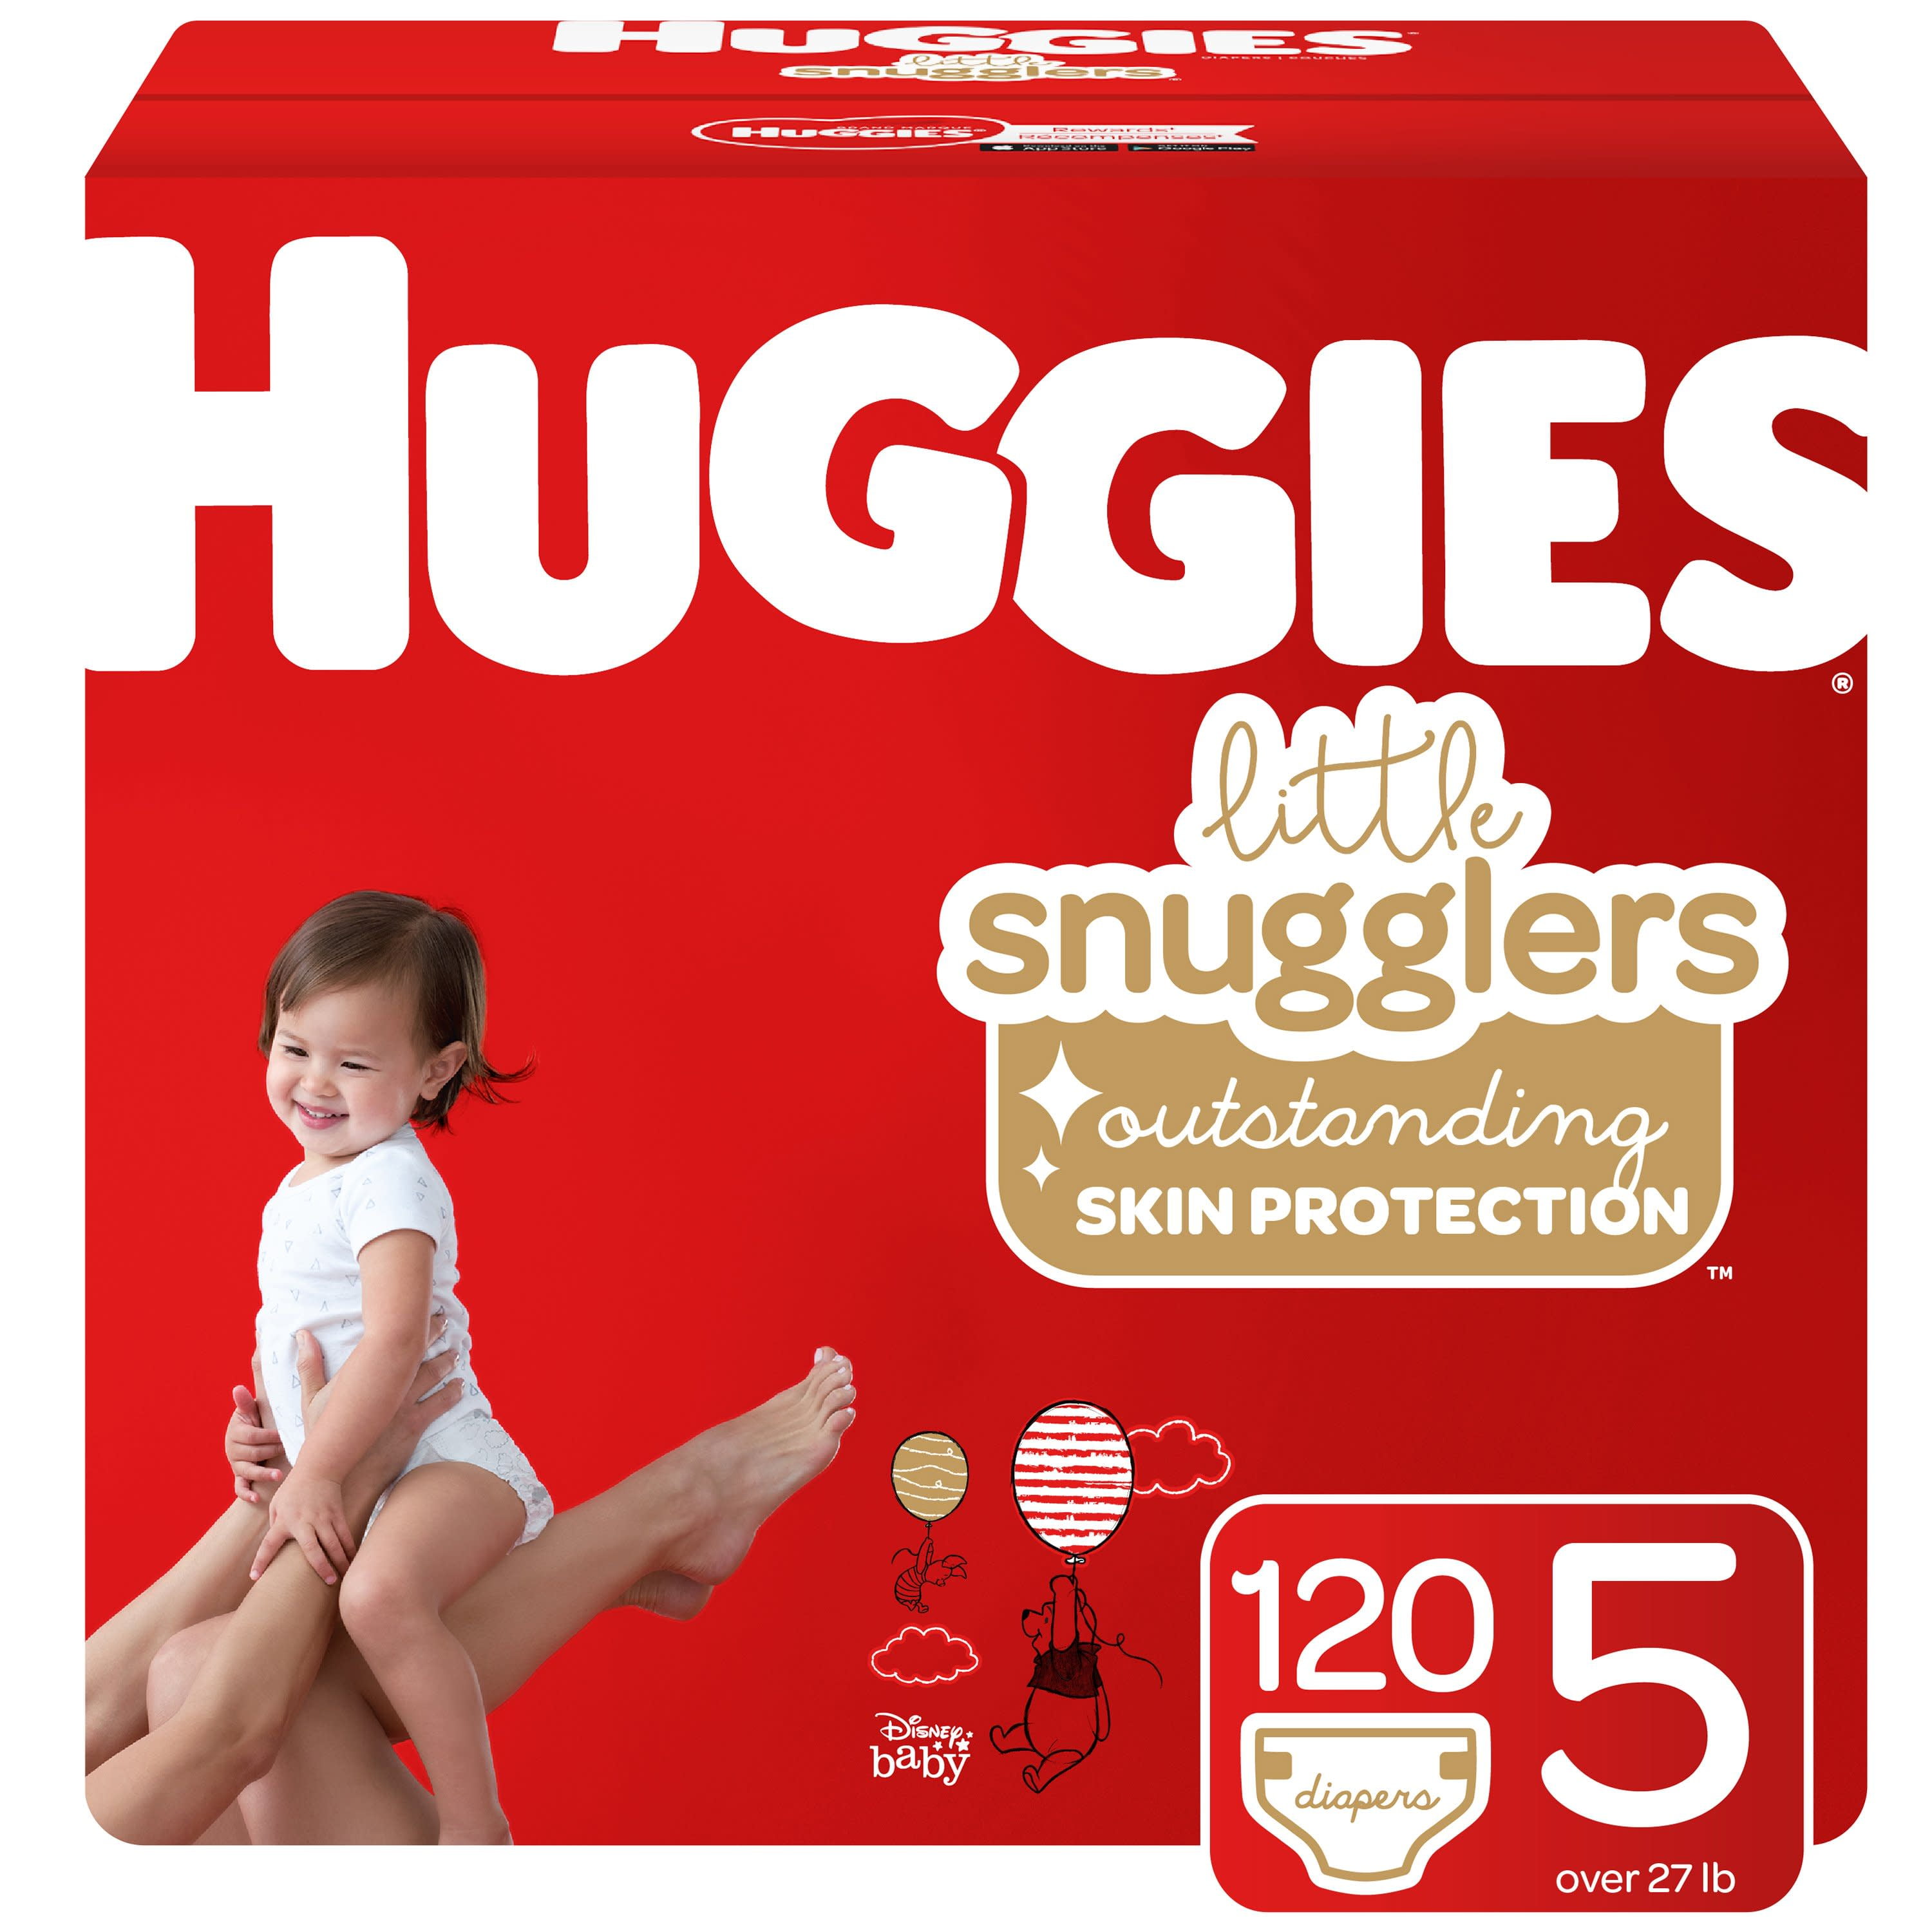 size 5 baby diapers